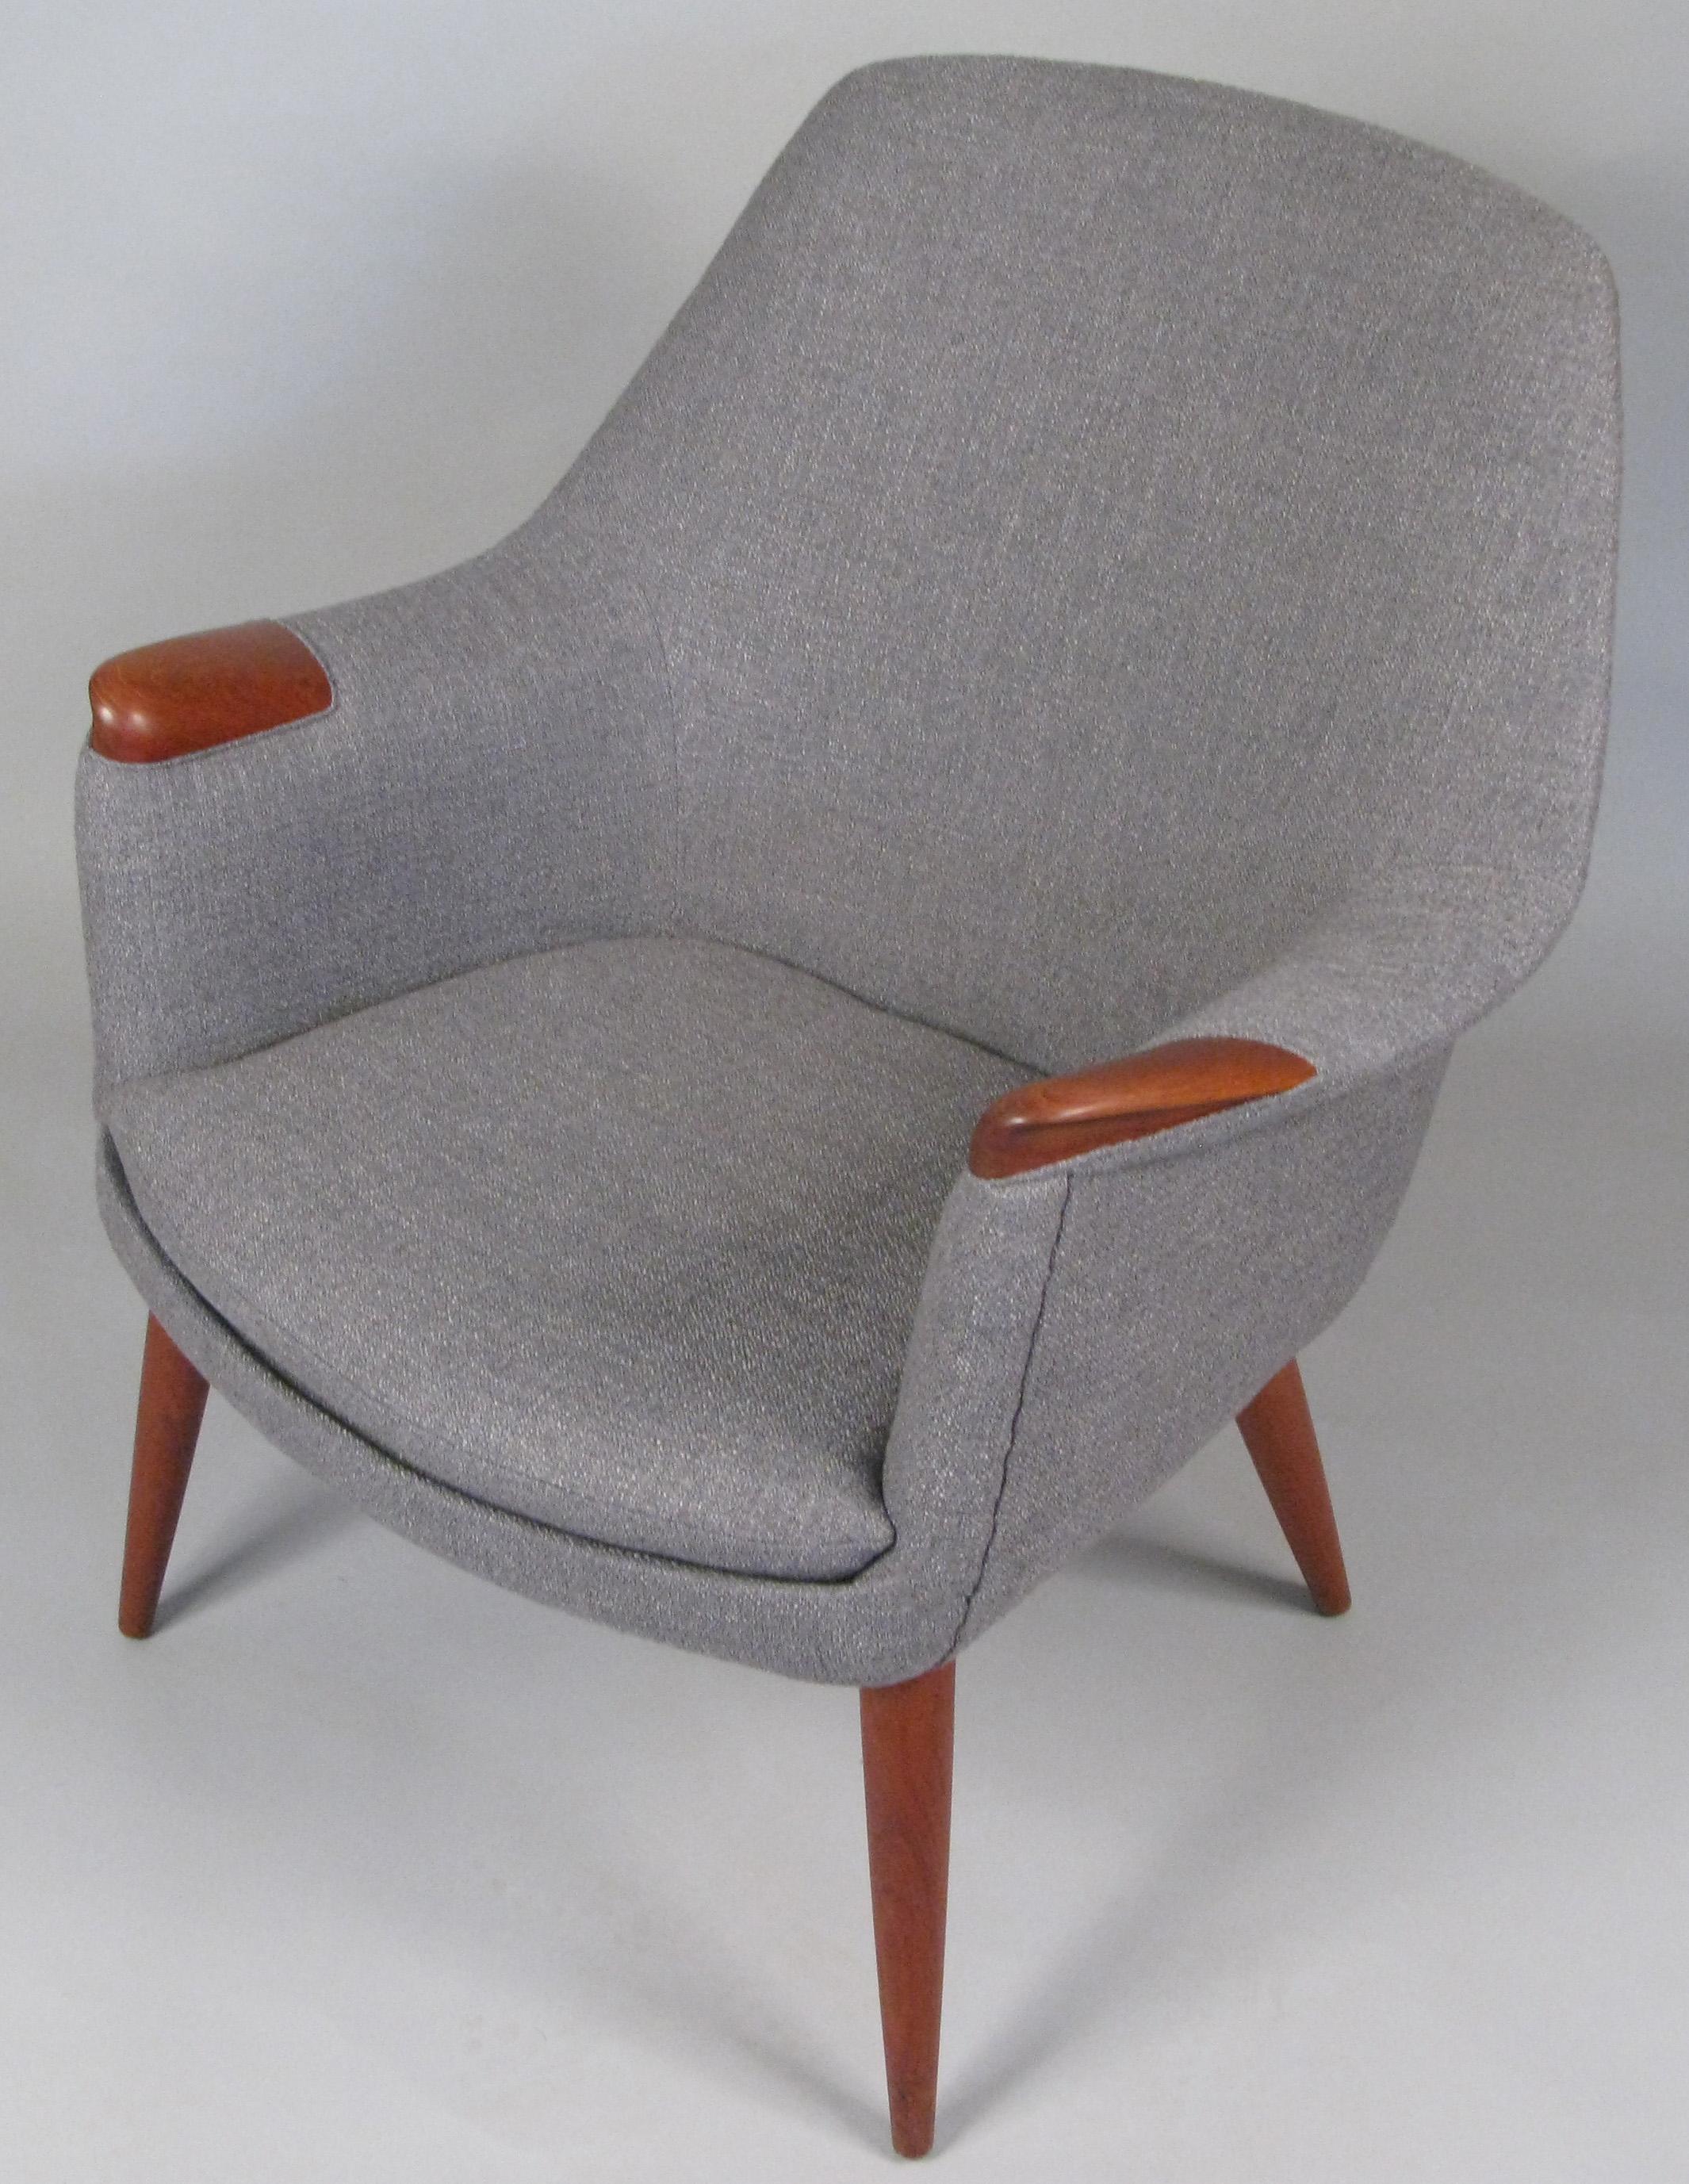 A truly stunning and beautiful 1950s lounge chair designed by Gerhard Berg and made by LK Hjelle, with solid teak legs and inset arms. Expertly reupholstered in a soft grey wool fabric. We also have the companion high back lounge chair that was